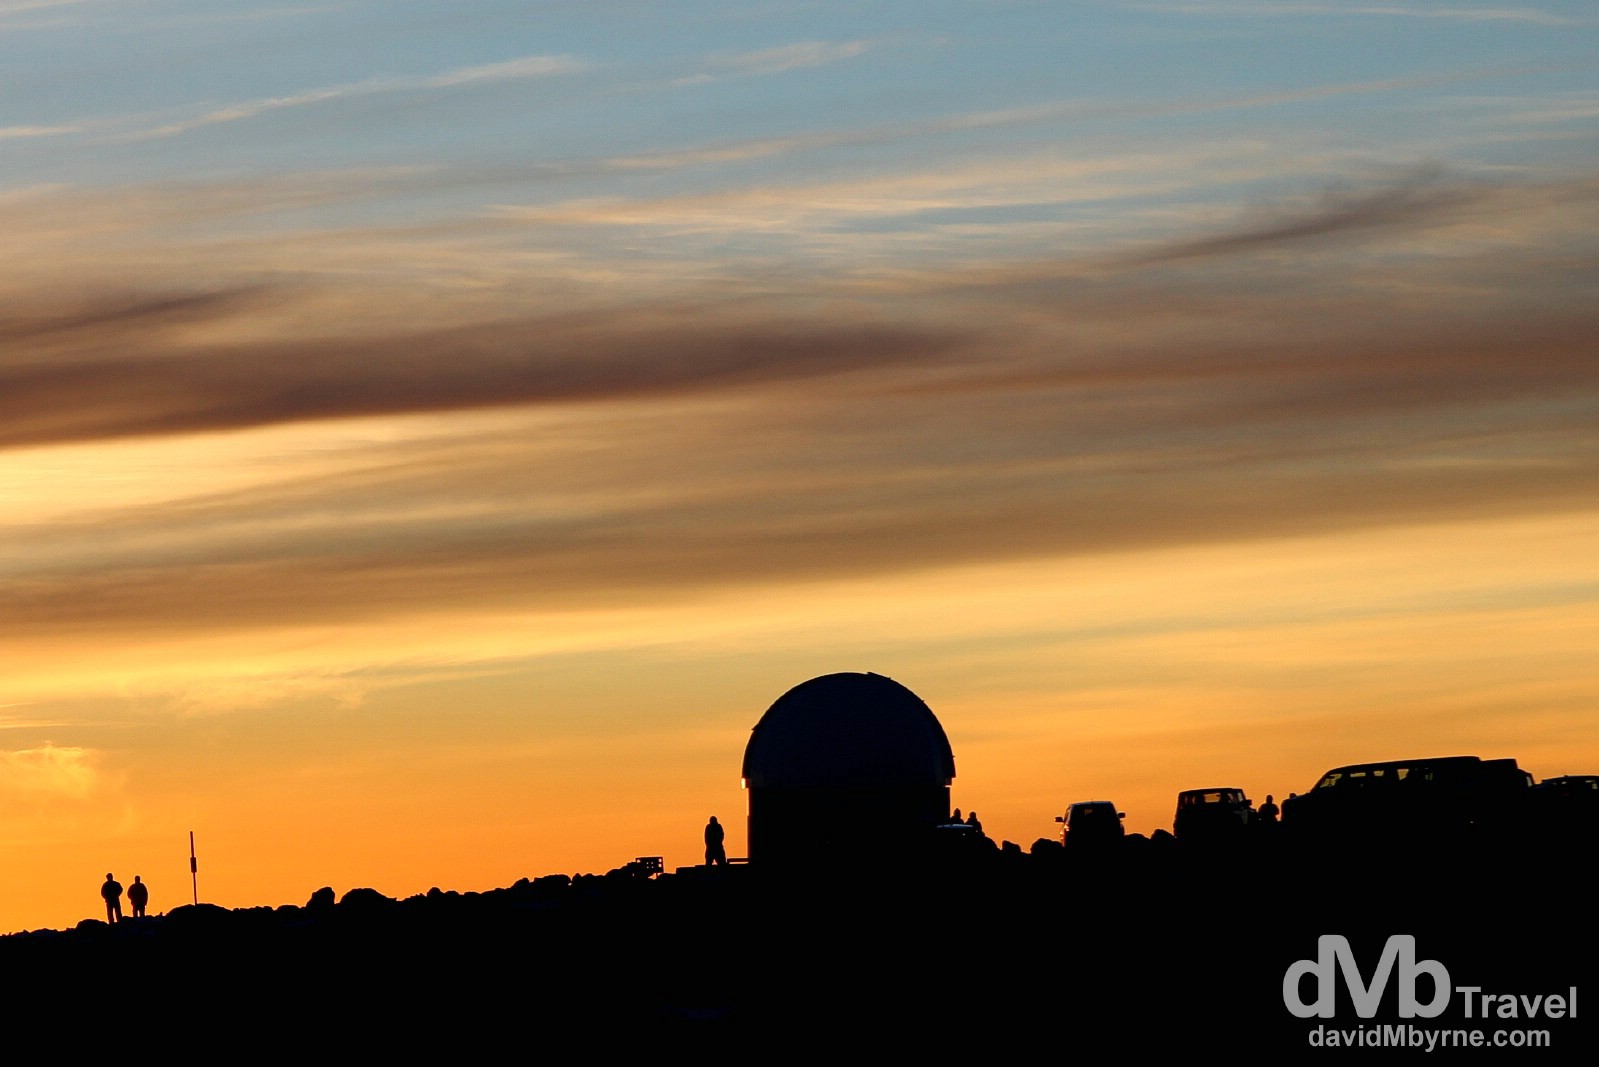 Sunset silhouettes on the top of Mauna Kea, the Big Island of Hawaii, USA. March 3rd 2013.